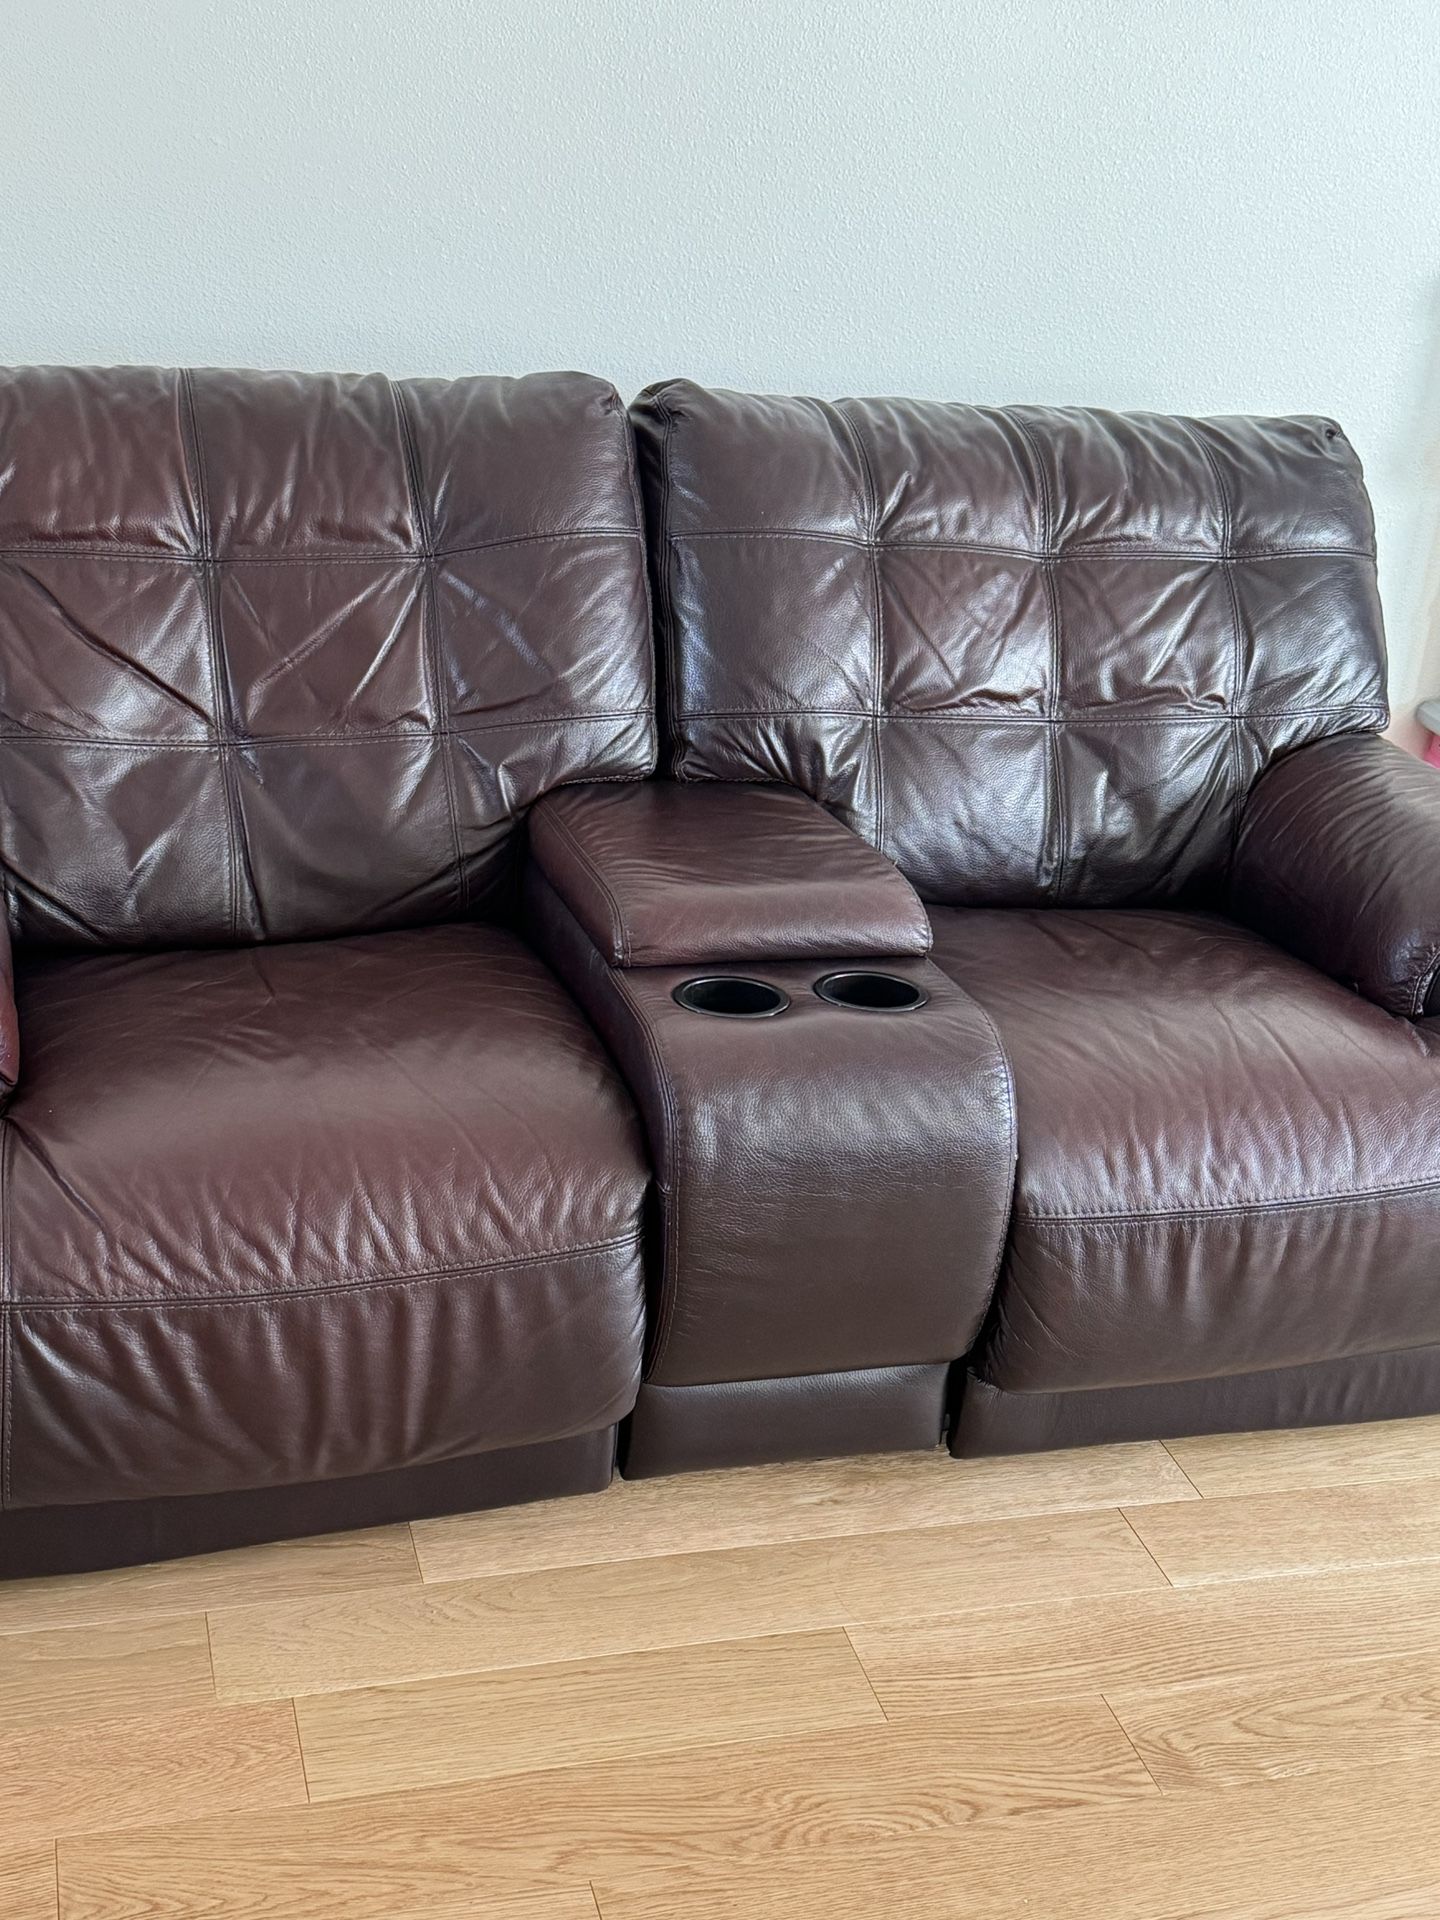 FREE Reclining Loveseat/ Couch/ Sofa